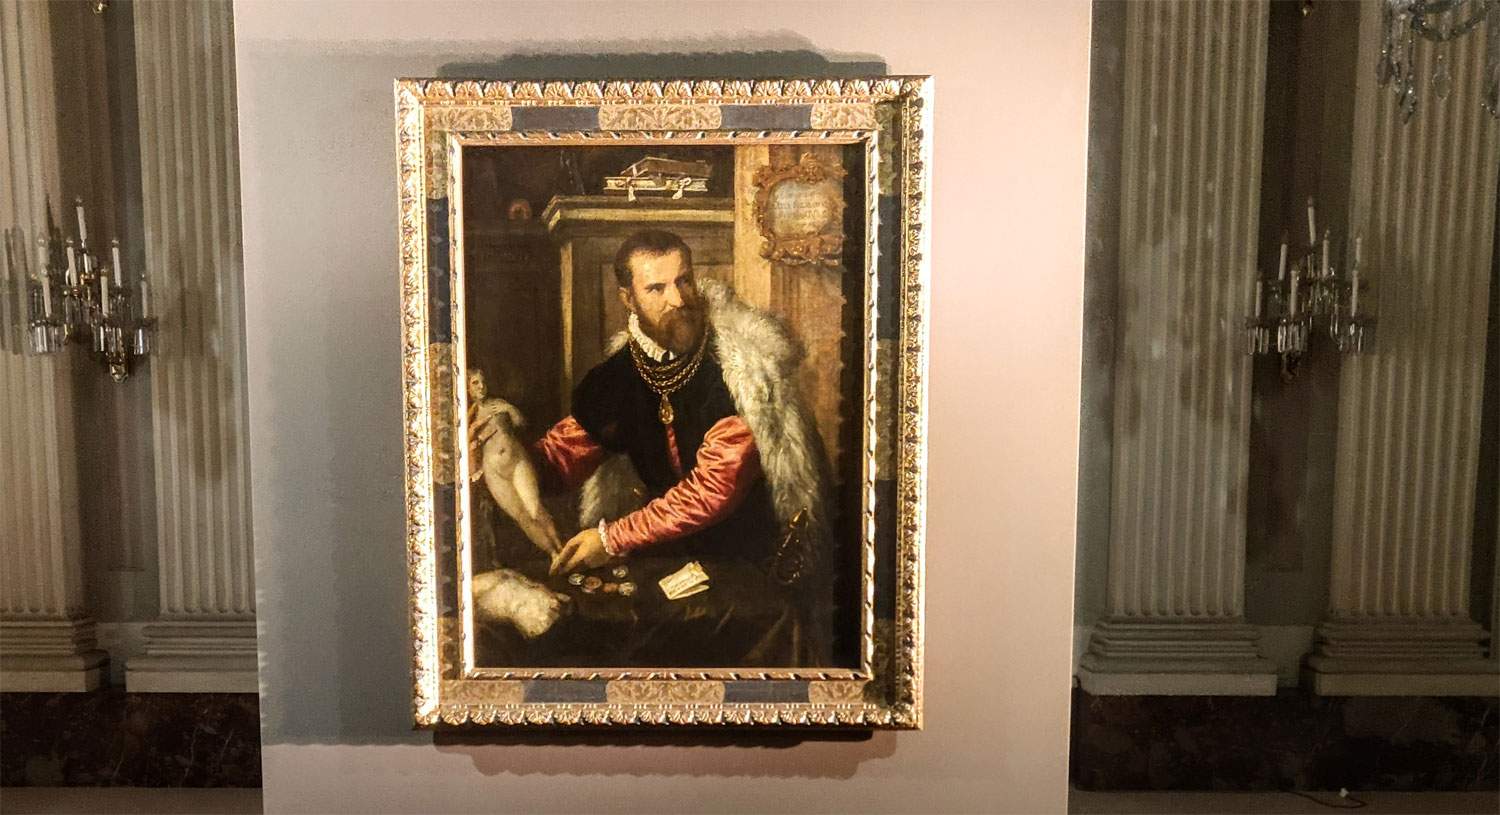 A guest at the Pitti Palace: from Vienna comes Titian's Portrait of Jacopo Strada